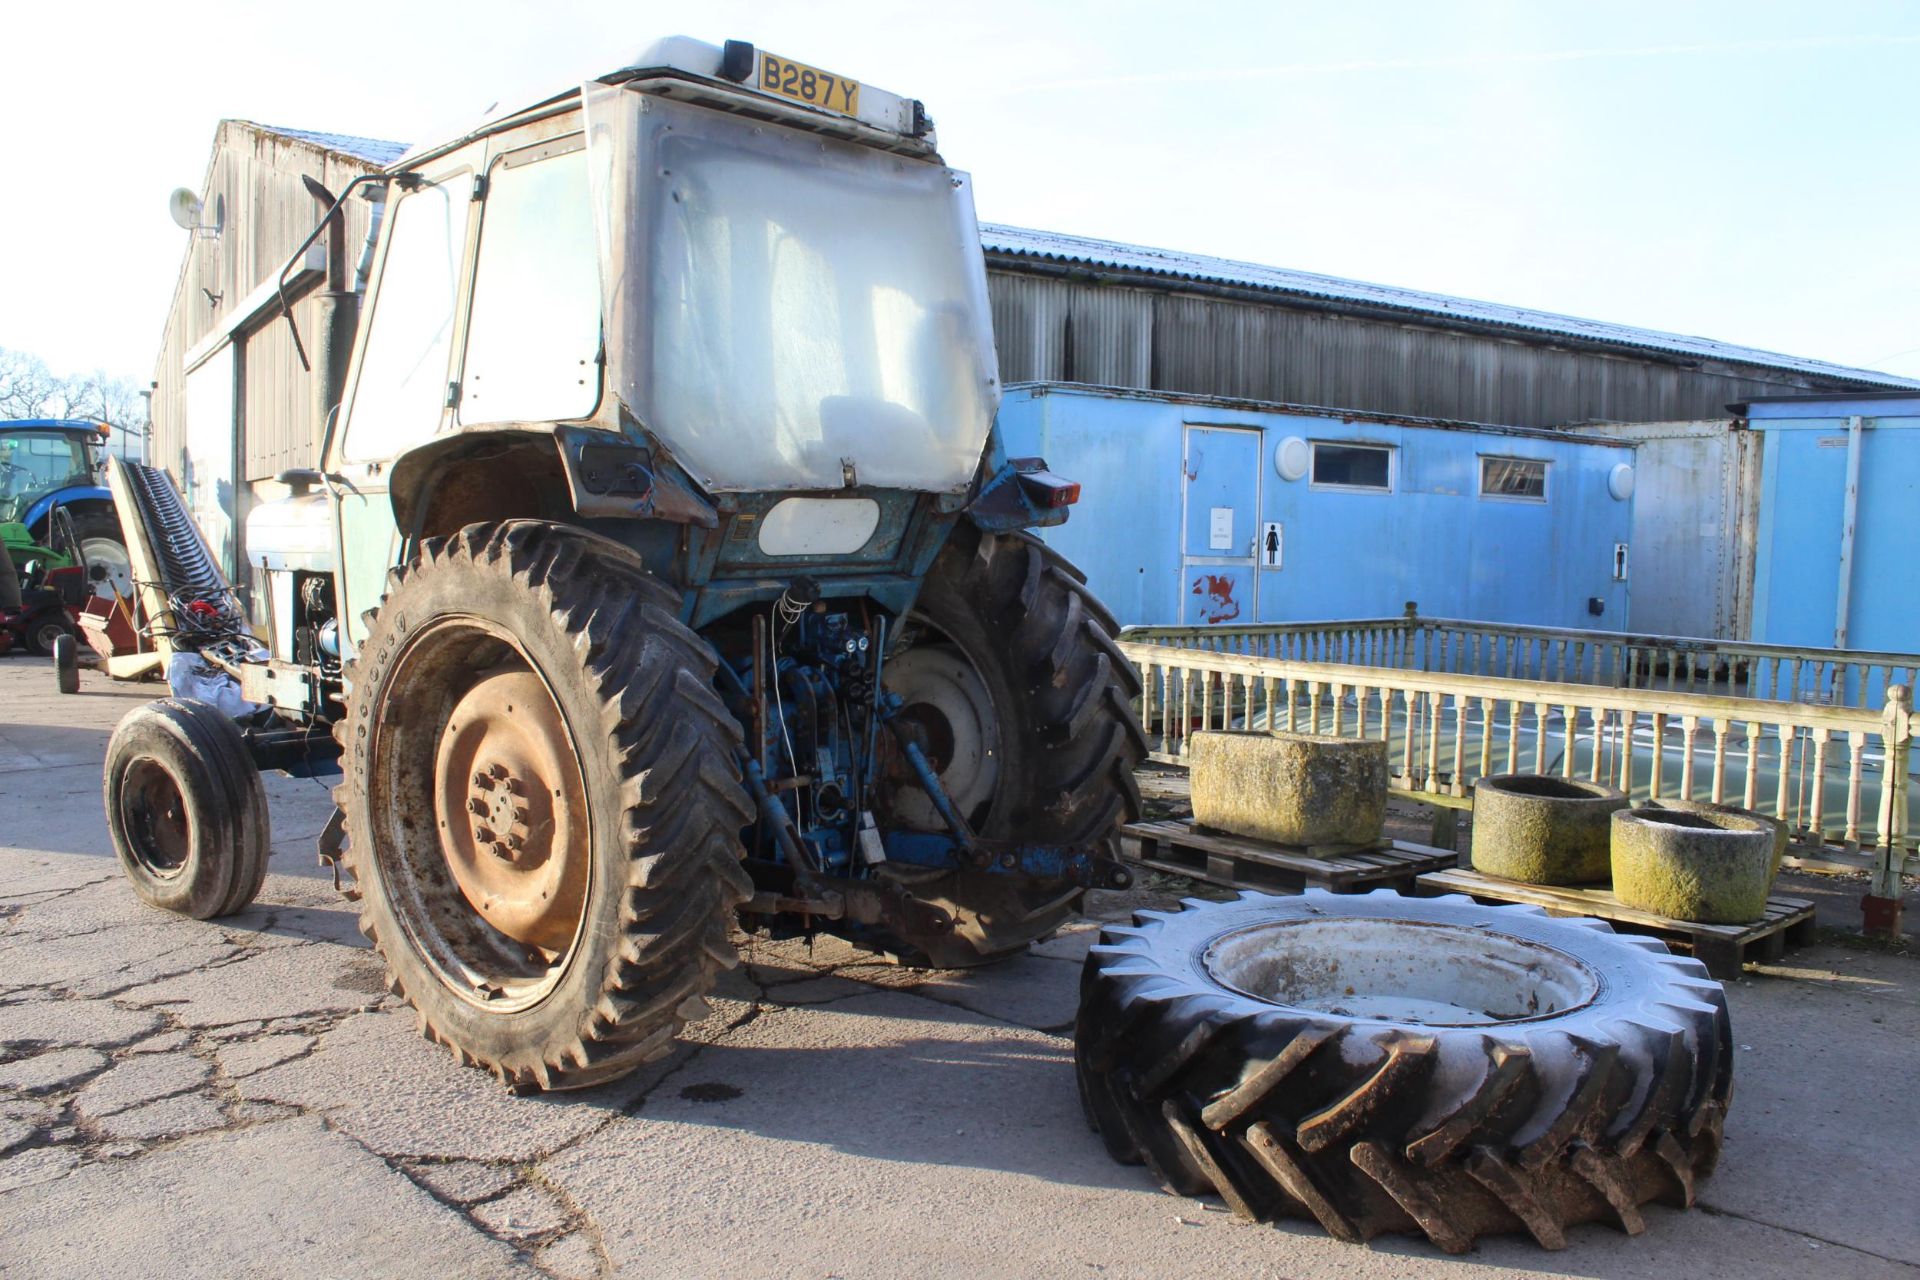 A FORD 6610 2 WHEEL DRIVE TRACTOR B287 YMA FIRST REG 04/01/85 WITH LOG BOOK WITH SPARE REAR - Image 5 of 5